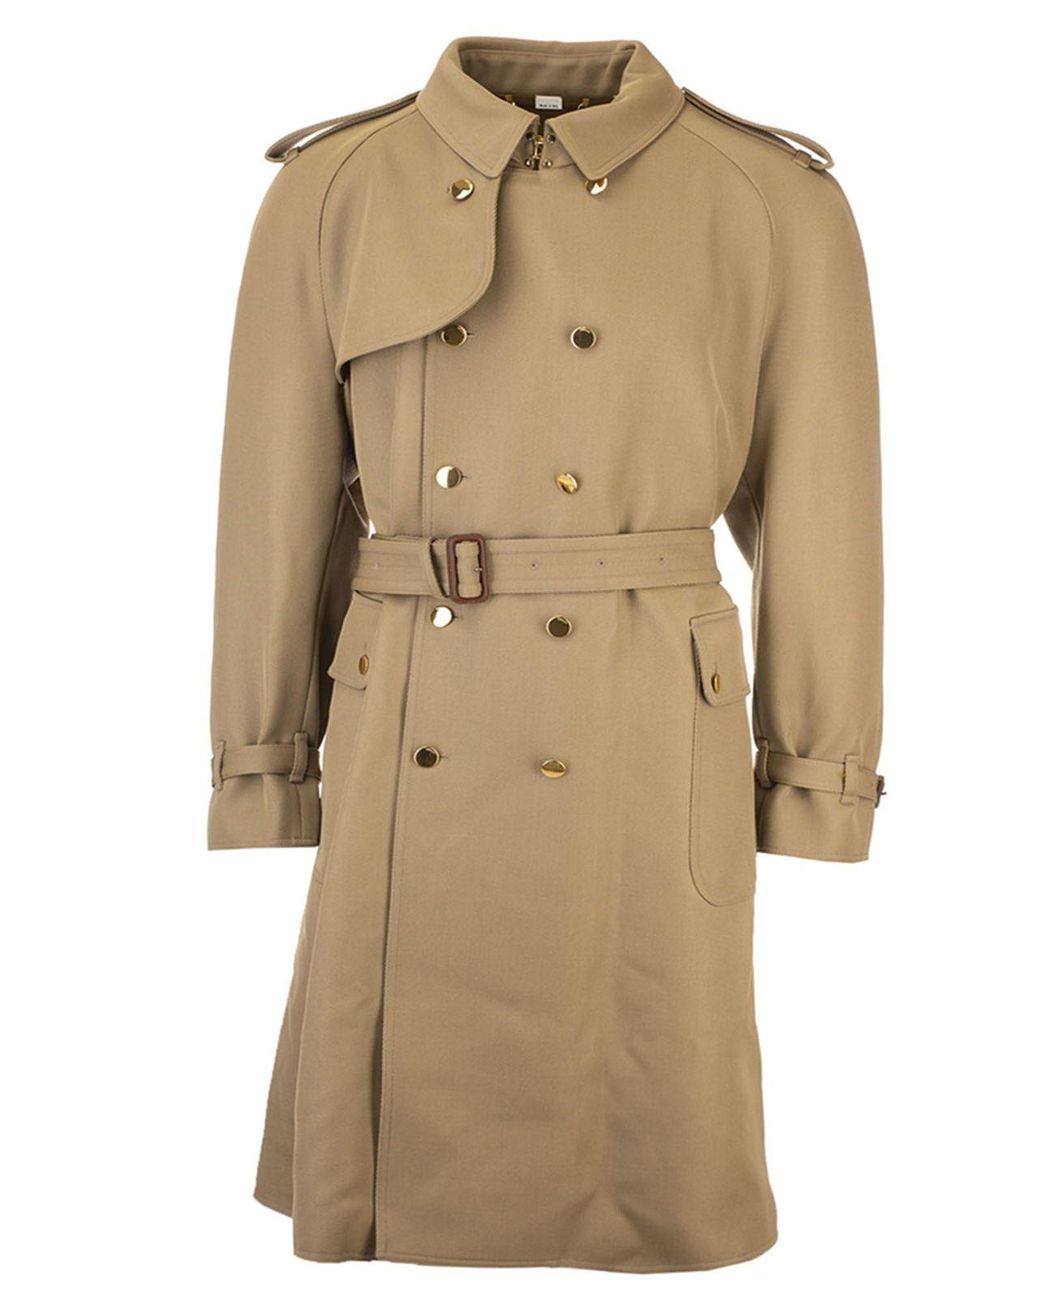 Gucci Wool Trench Coat In Camel Color in Natural for Men - Lyst